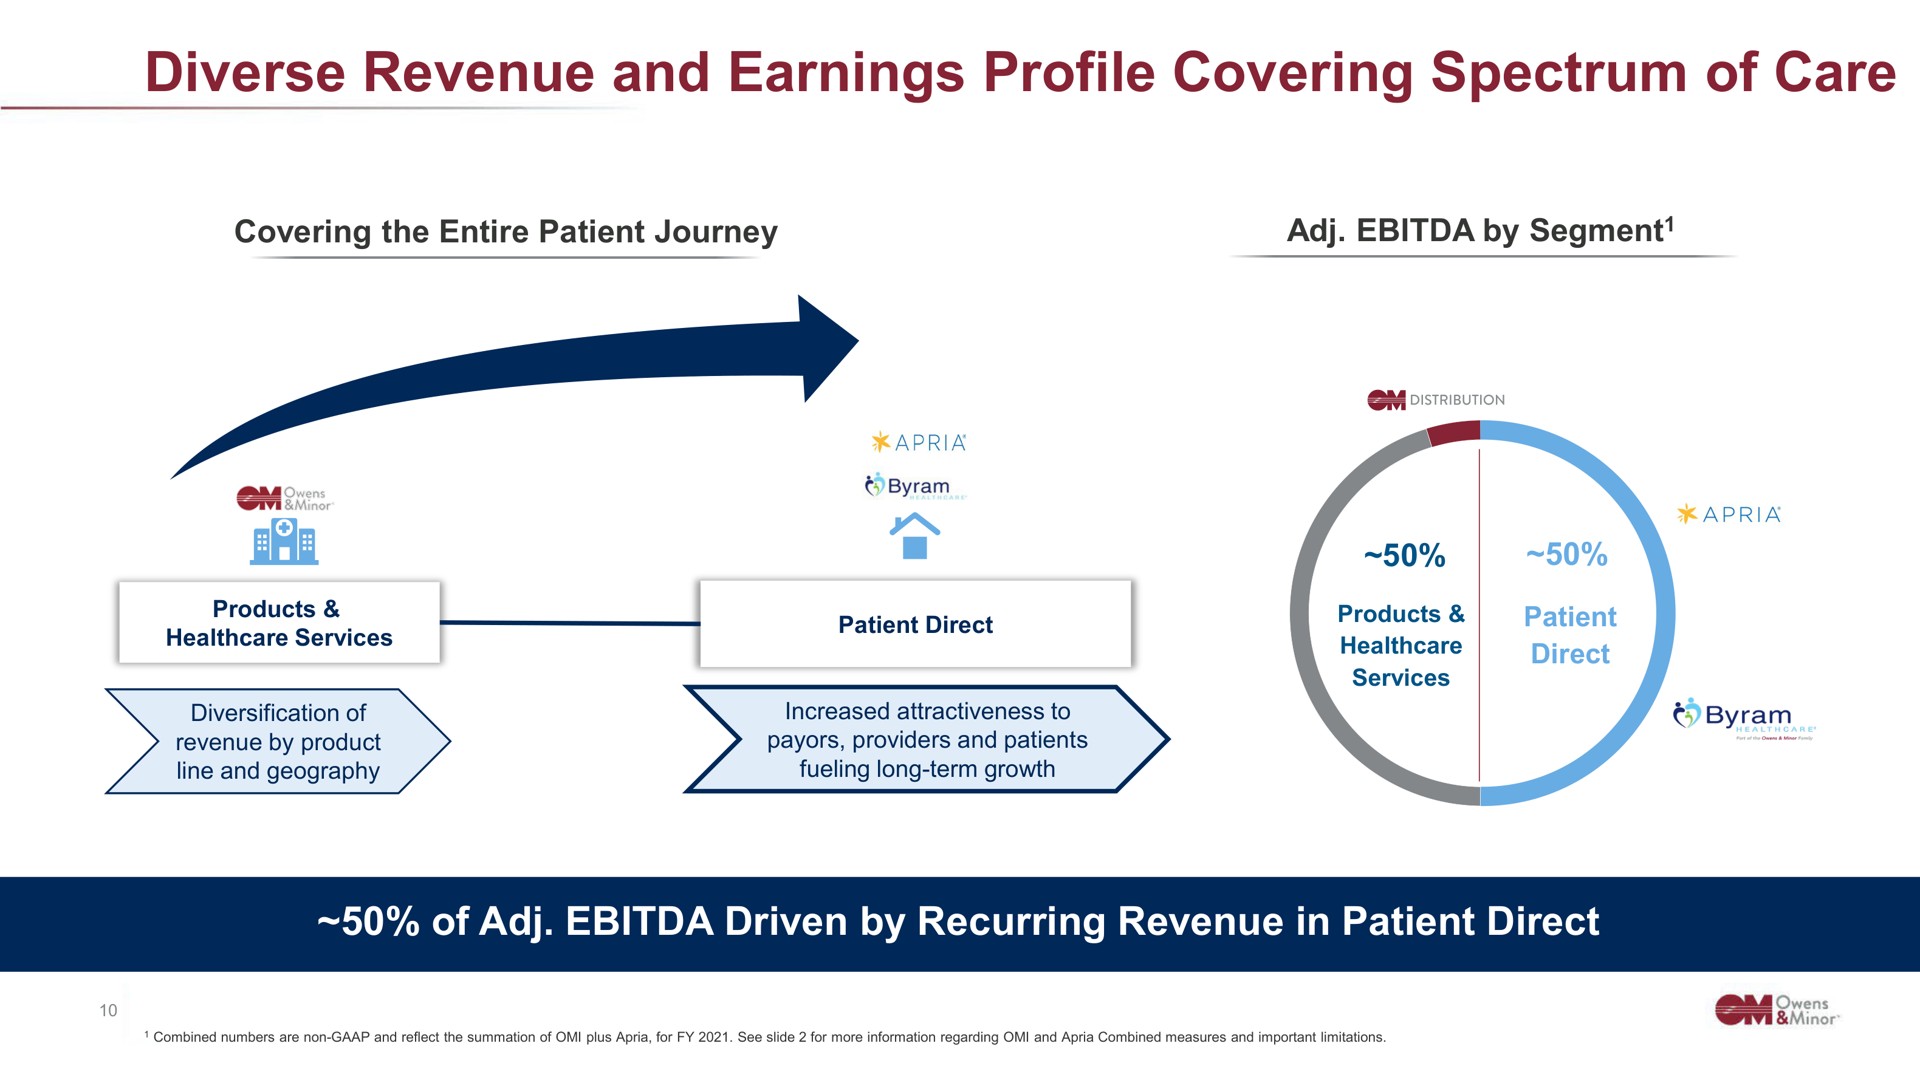 diverse revenue and earnings profile covering spectrum of care driven by recurring in patient direct | Owens&Minor